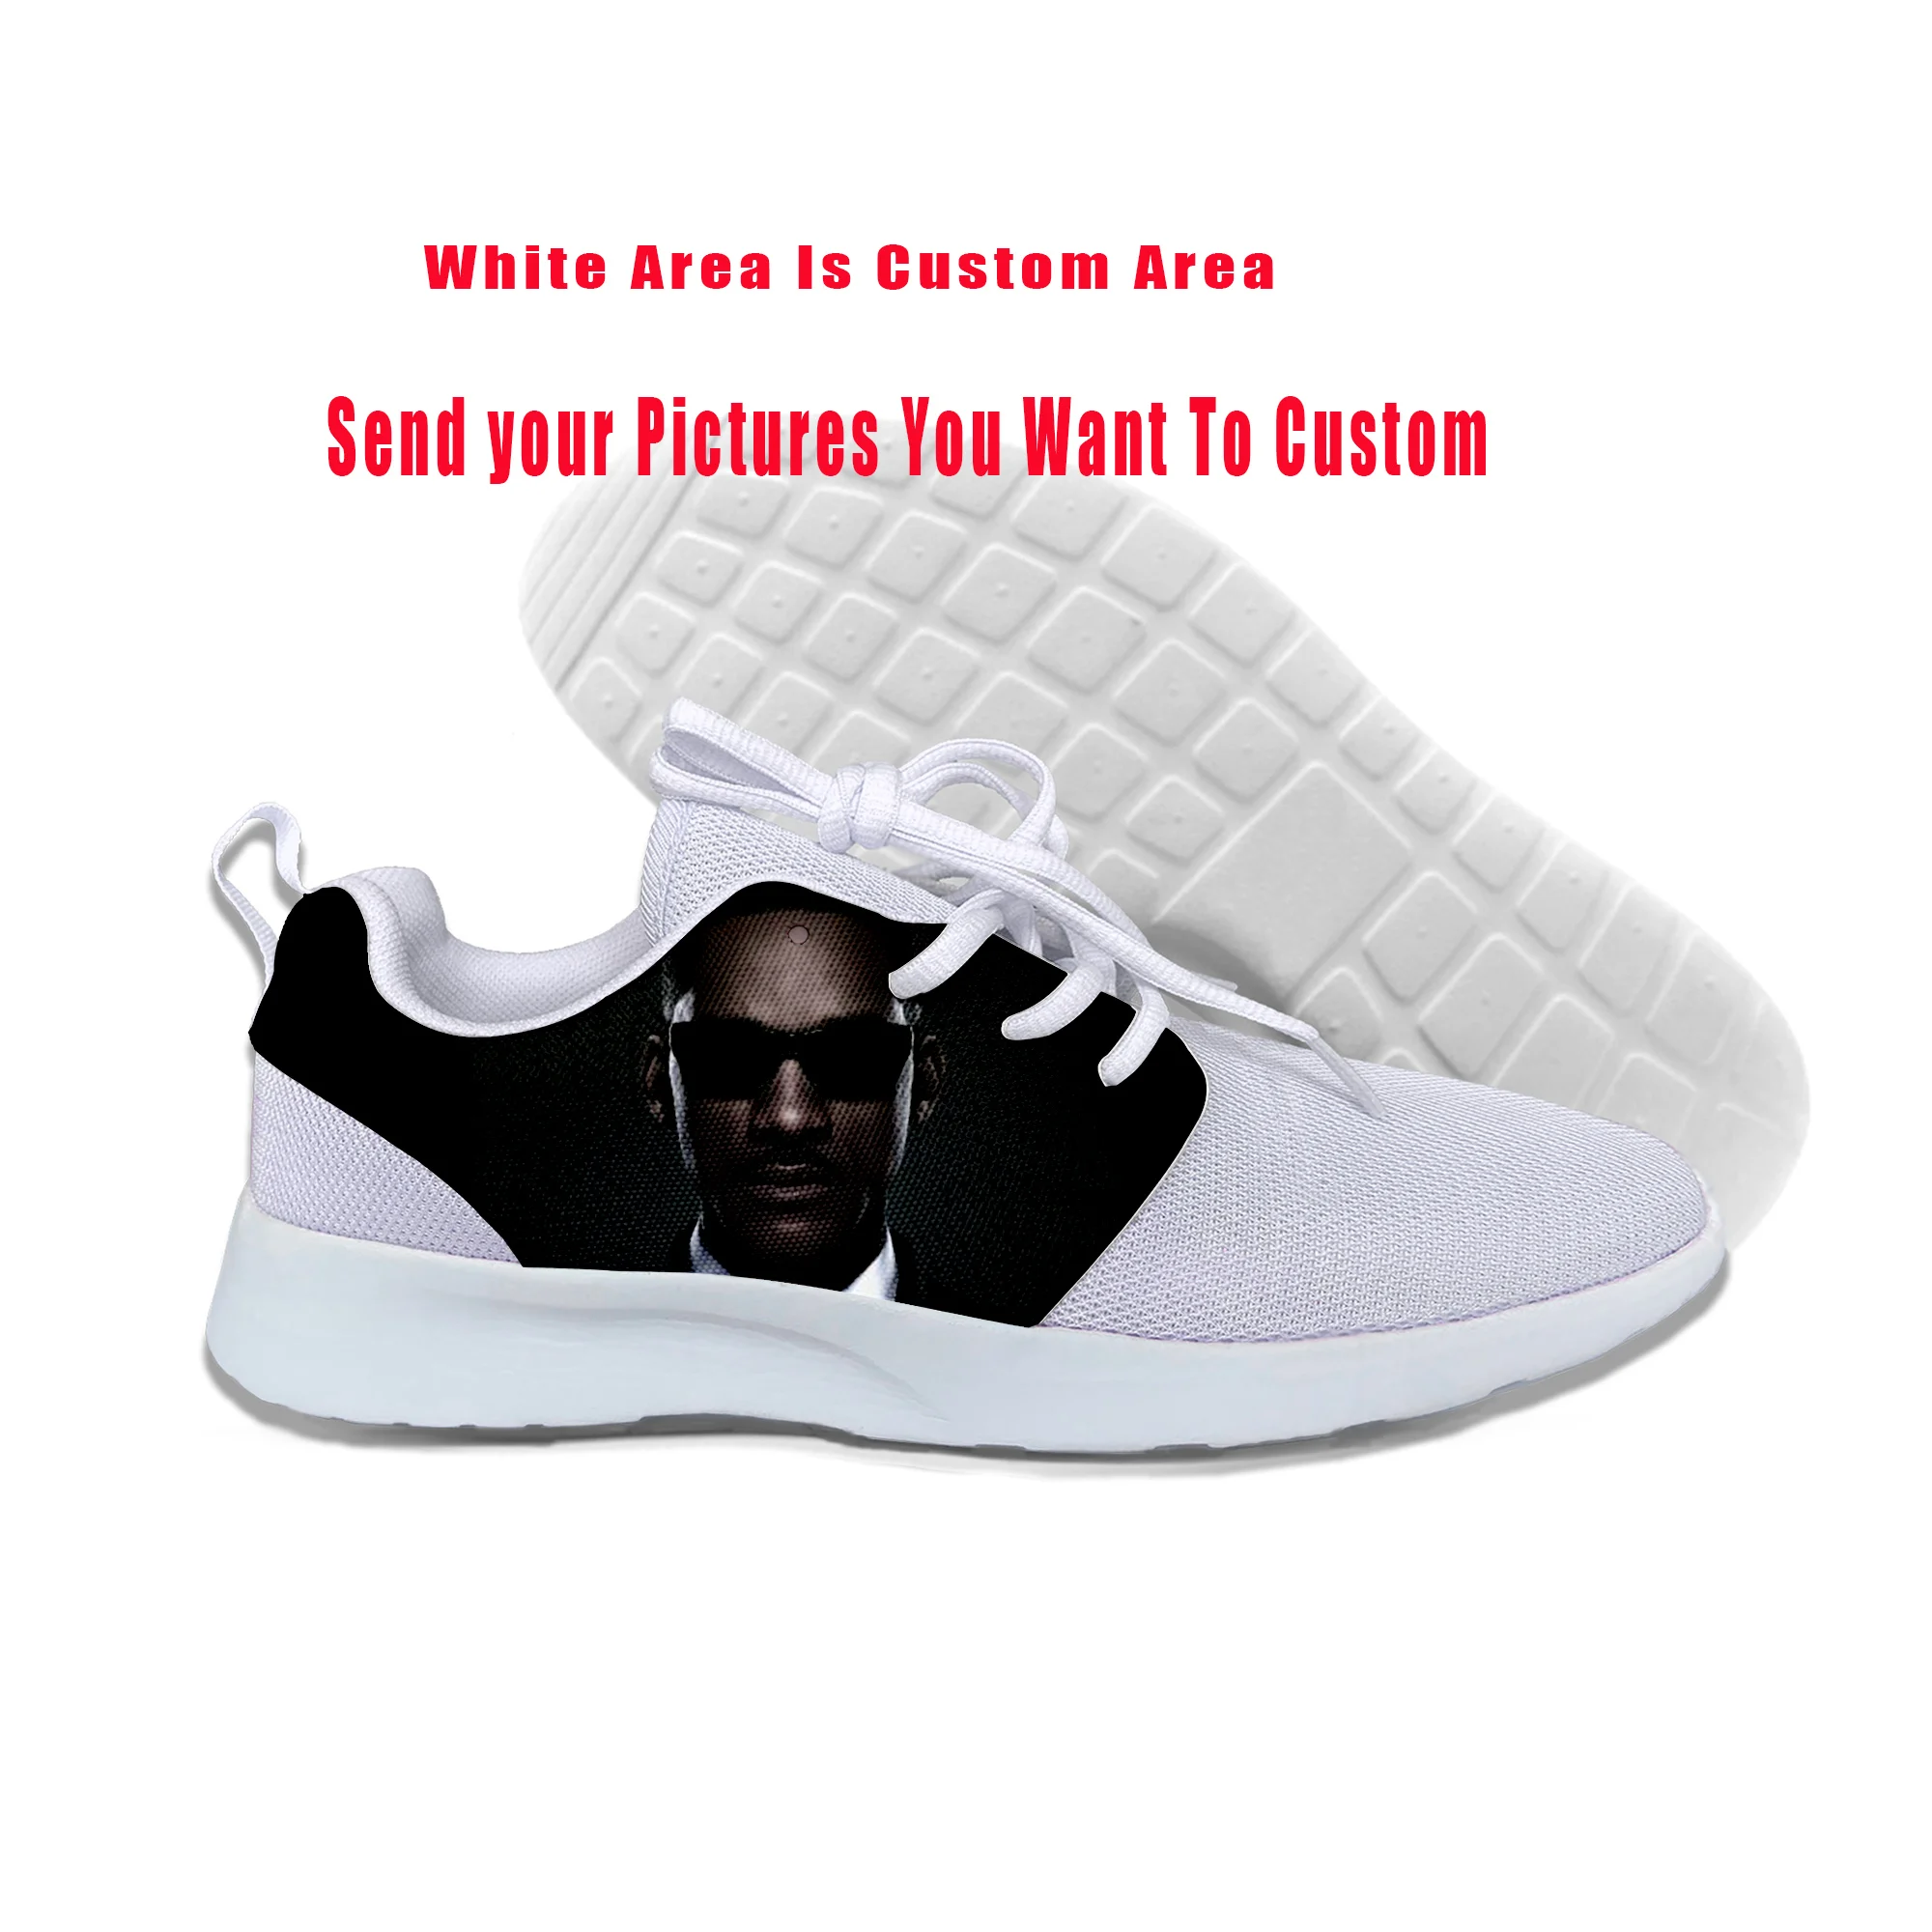 

Summer Style Shoes So Fresh Will Smith Sports Shoes Sexy Fresh Prince of Bel Air Women Men Lightweight Breathable Running Shoes